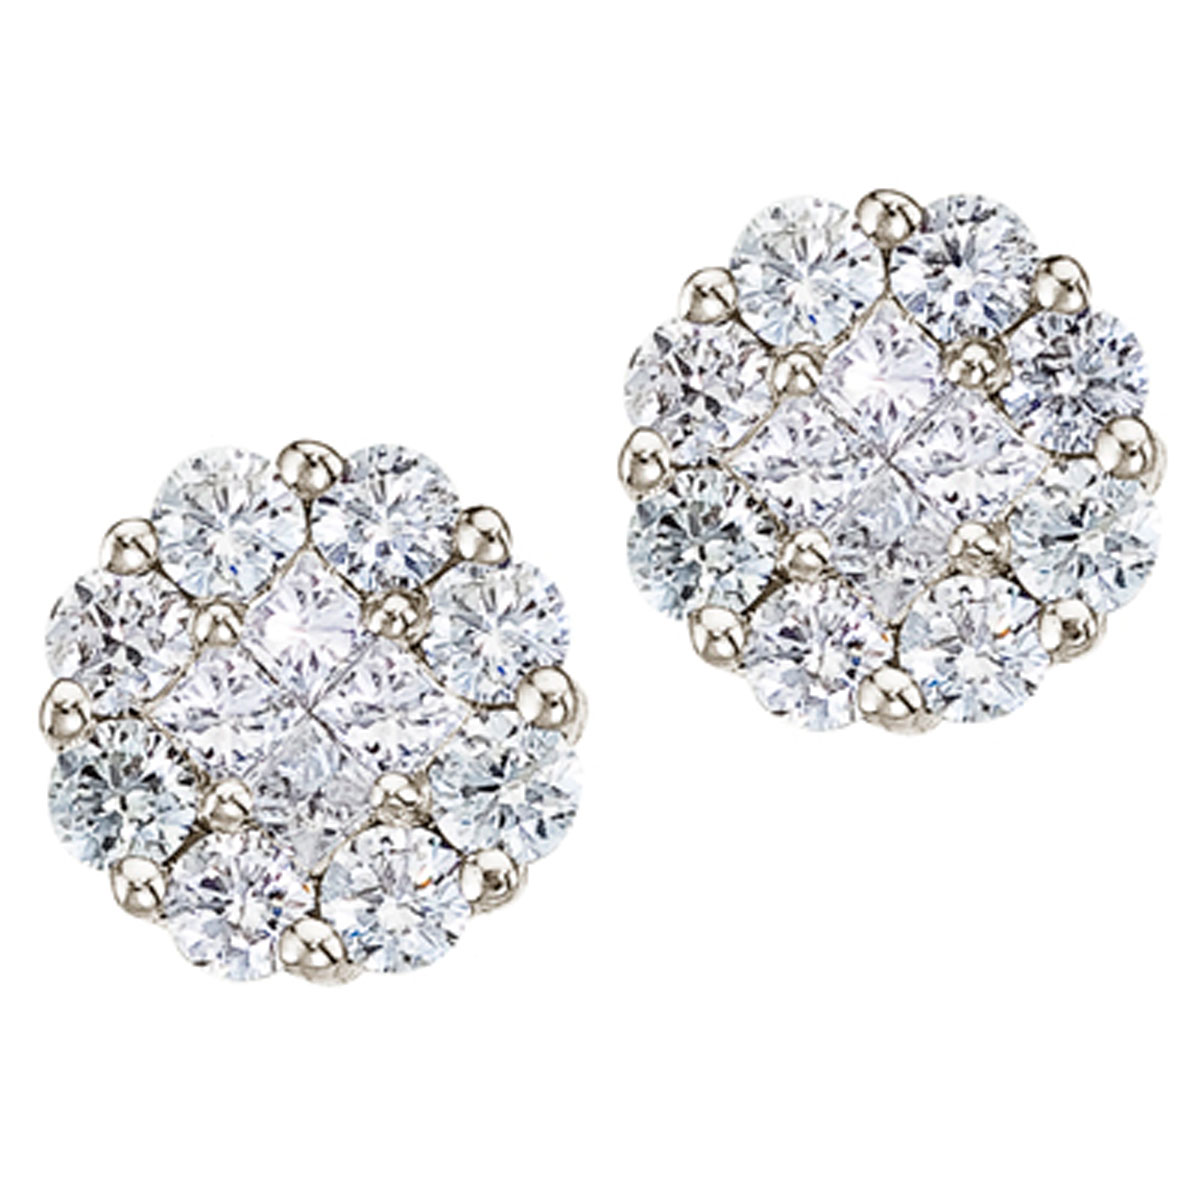 JCX2482: Gorgeous 14k white gold earrings with a full carat of shimmering genuine diamonds. Clustaires give all the sparkling elegence of a solitaire at a fraction of the price.